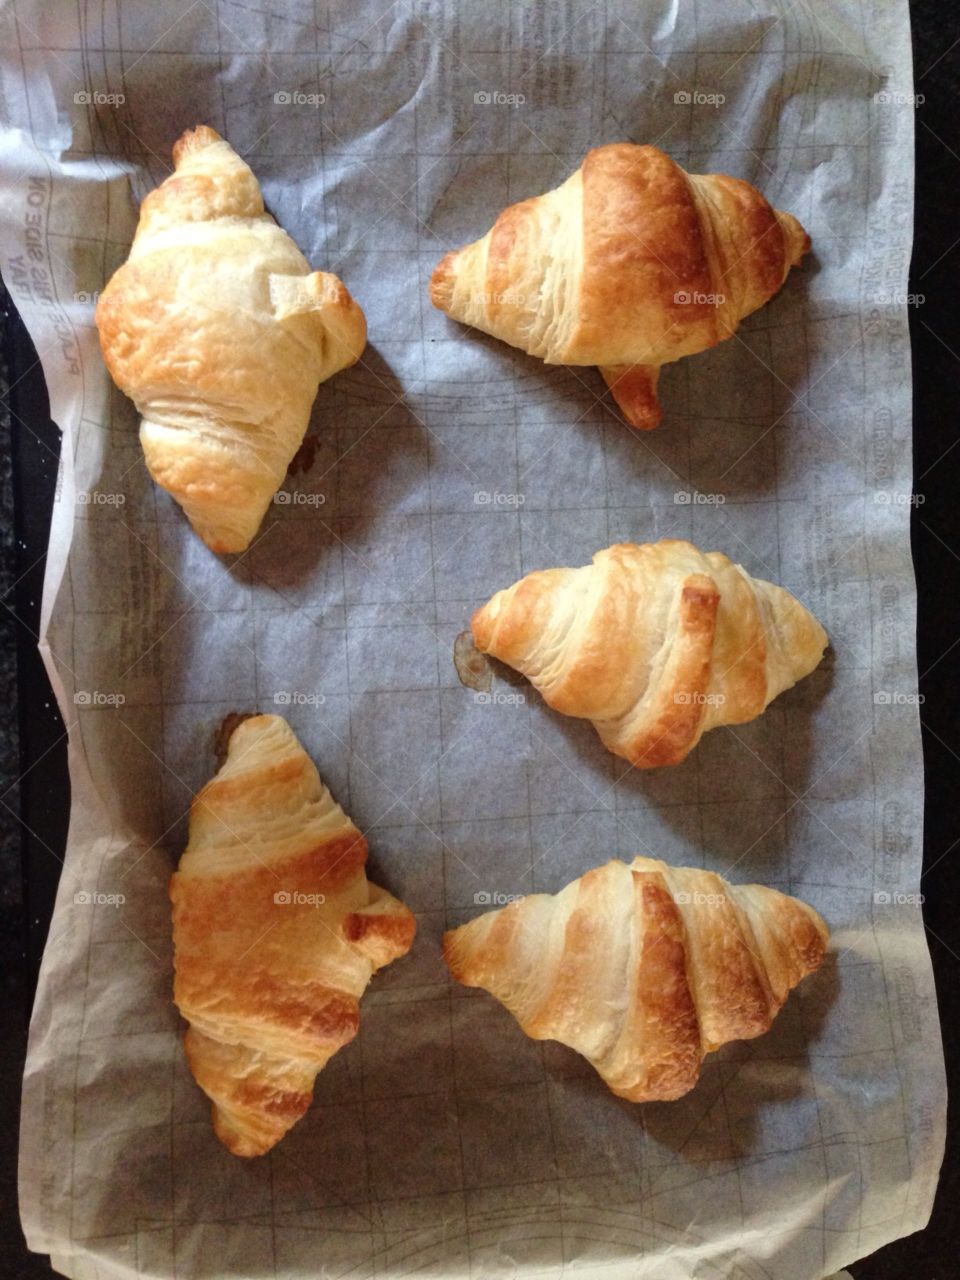 Home baked croissants 